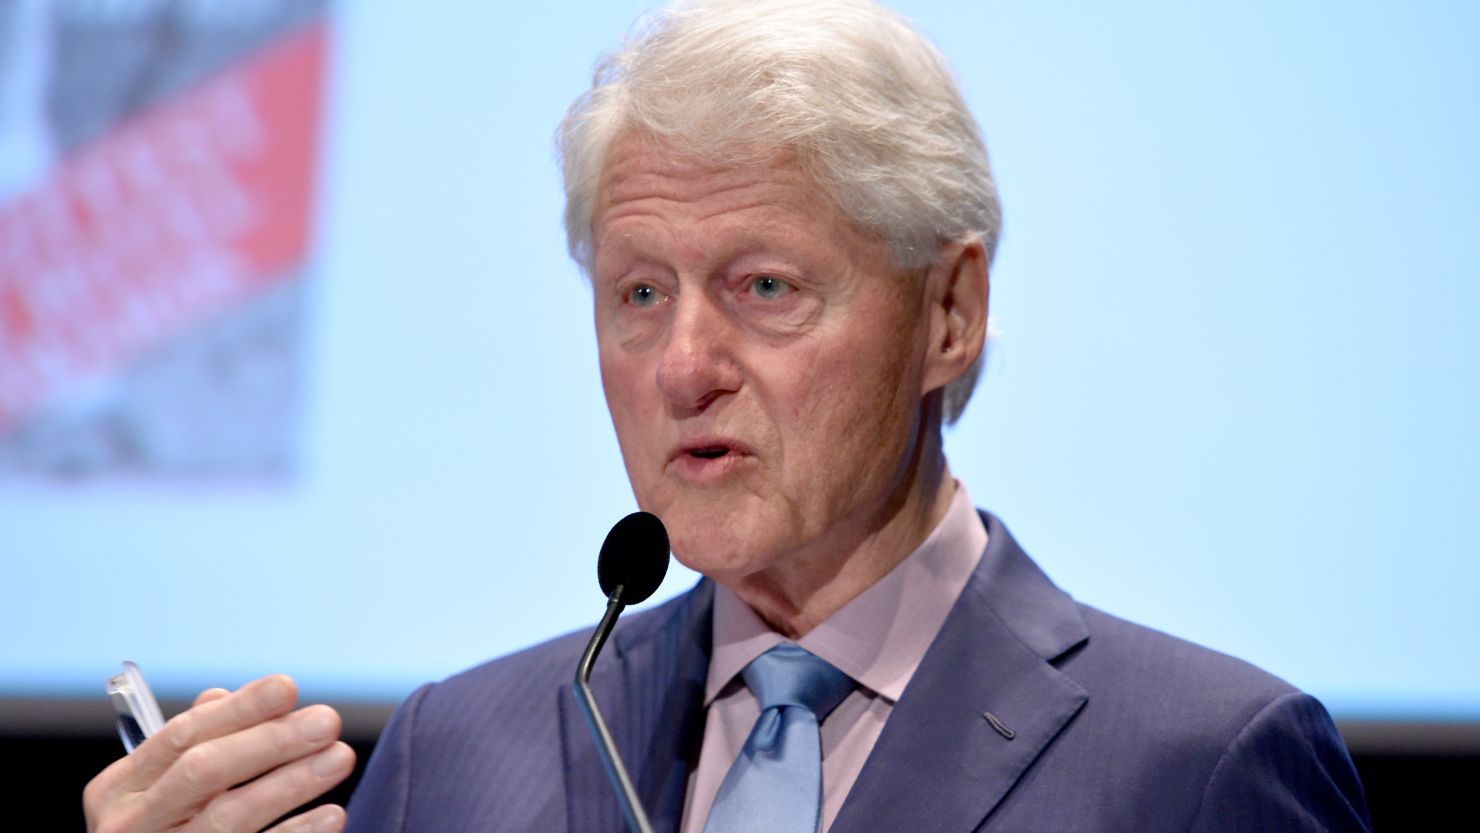 Former President Bill Clinton appears in this file photo.